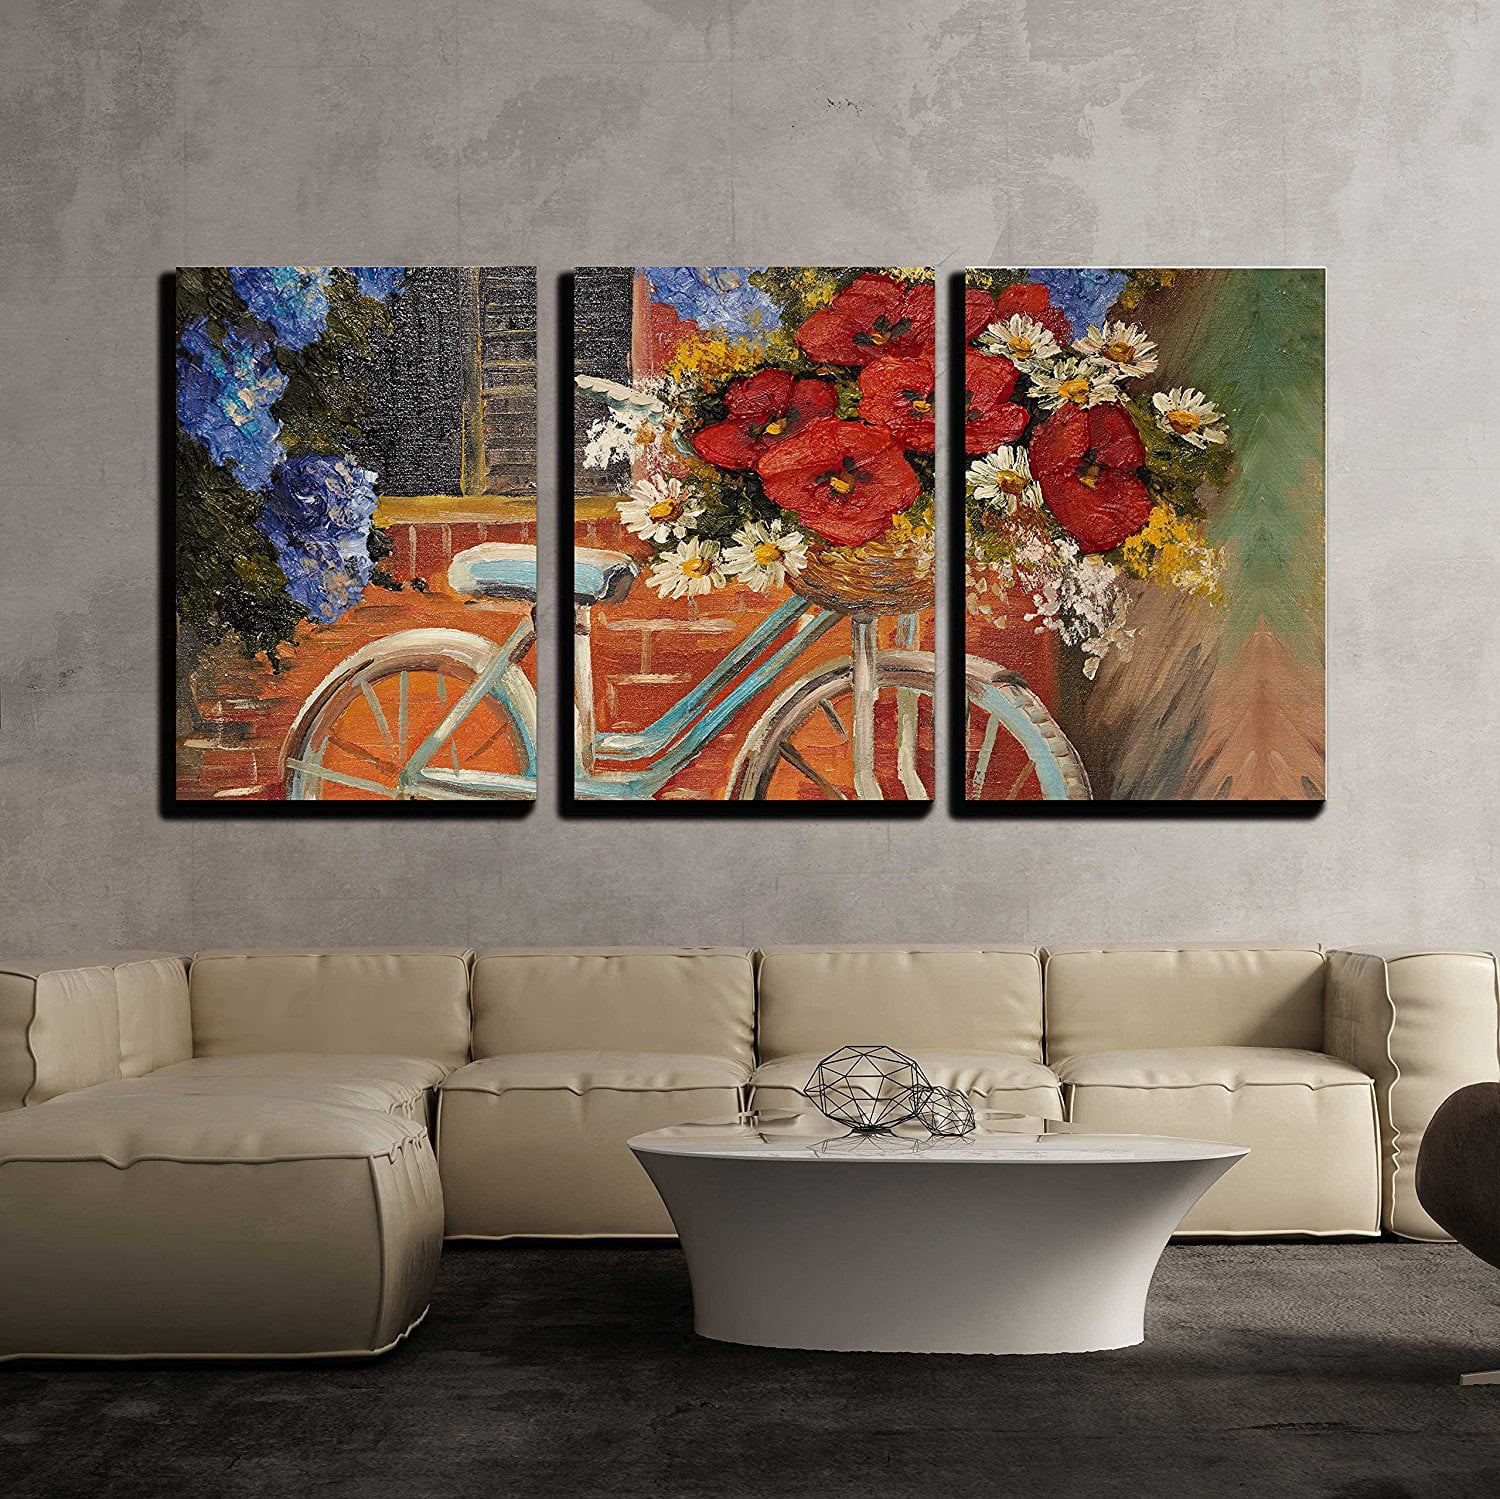 Painting Art On Walls: Creating A Masterpiece On The Canvas Of The Wall